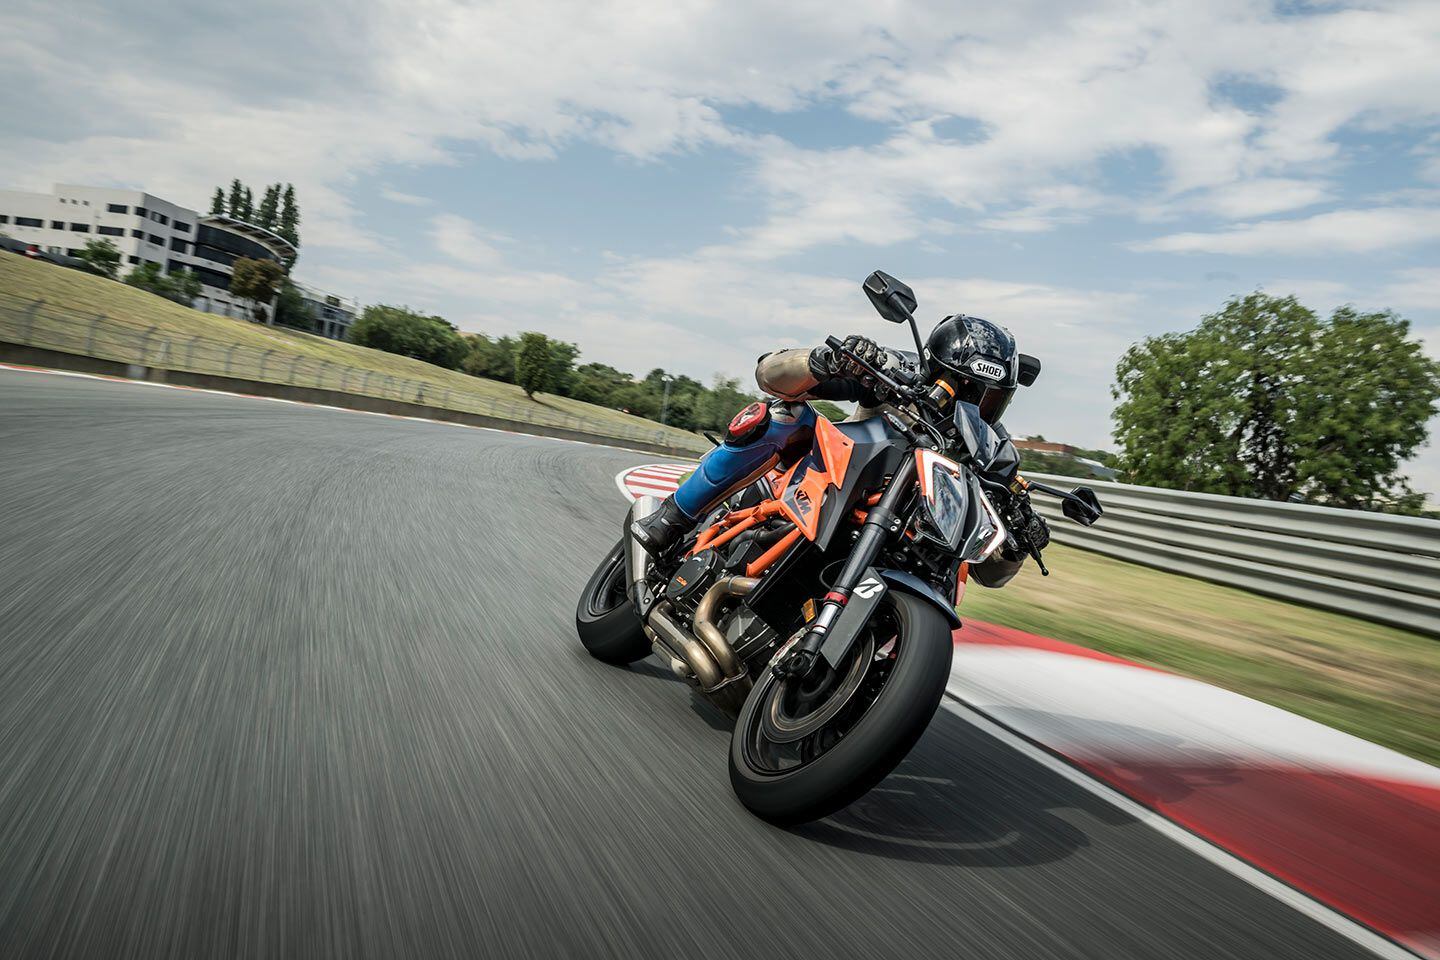 We try out Bridgestone’s new for 2024 Battlax S23 high-performance streetbike tires.